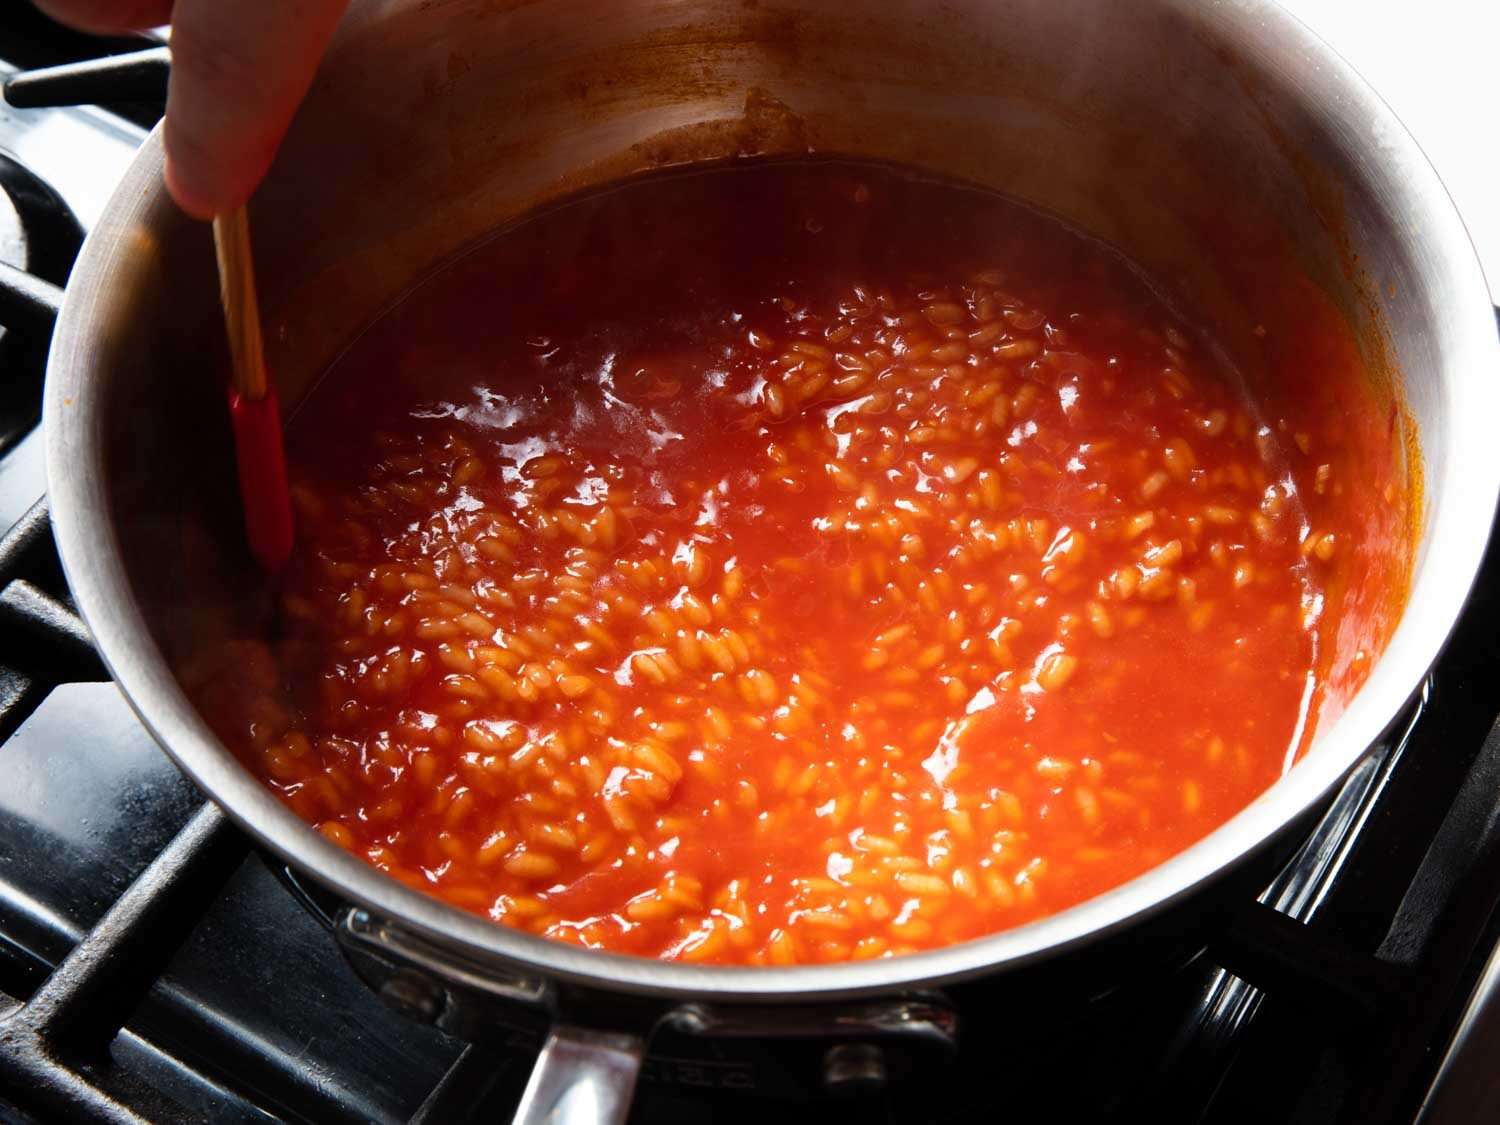 Risotto cooking with strained tomato pulp in a saucier.